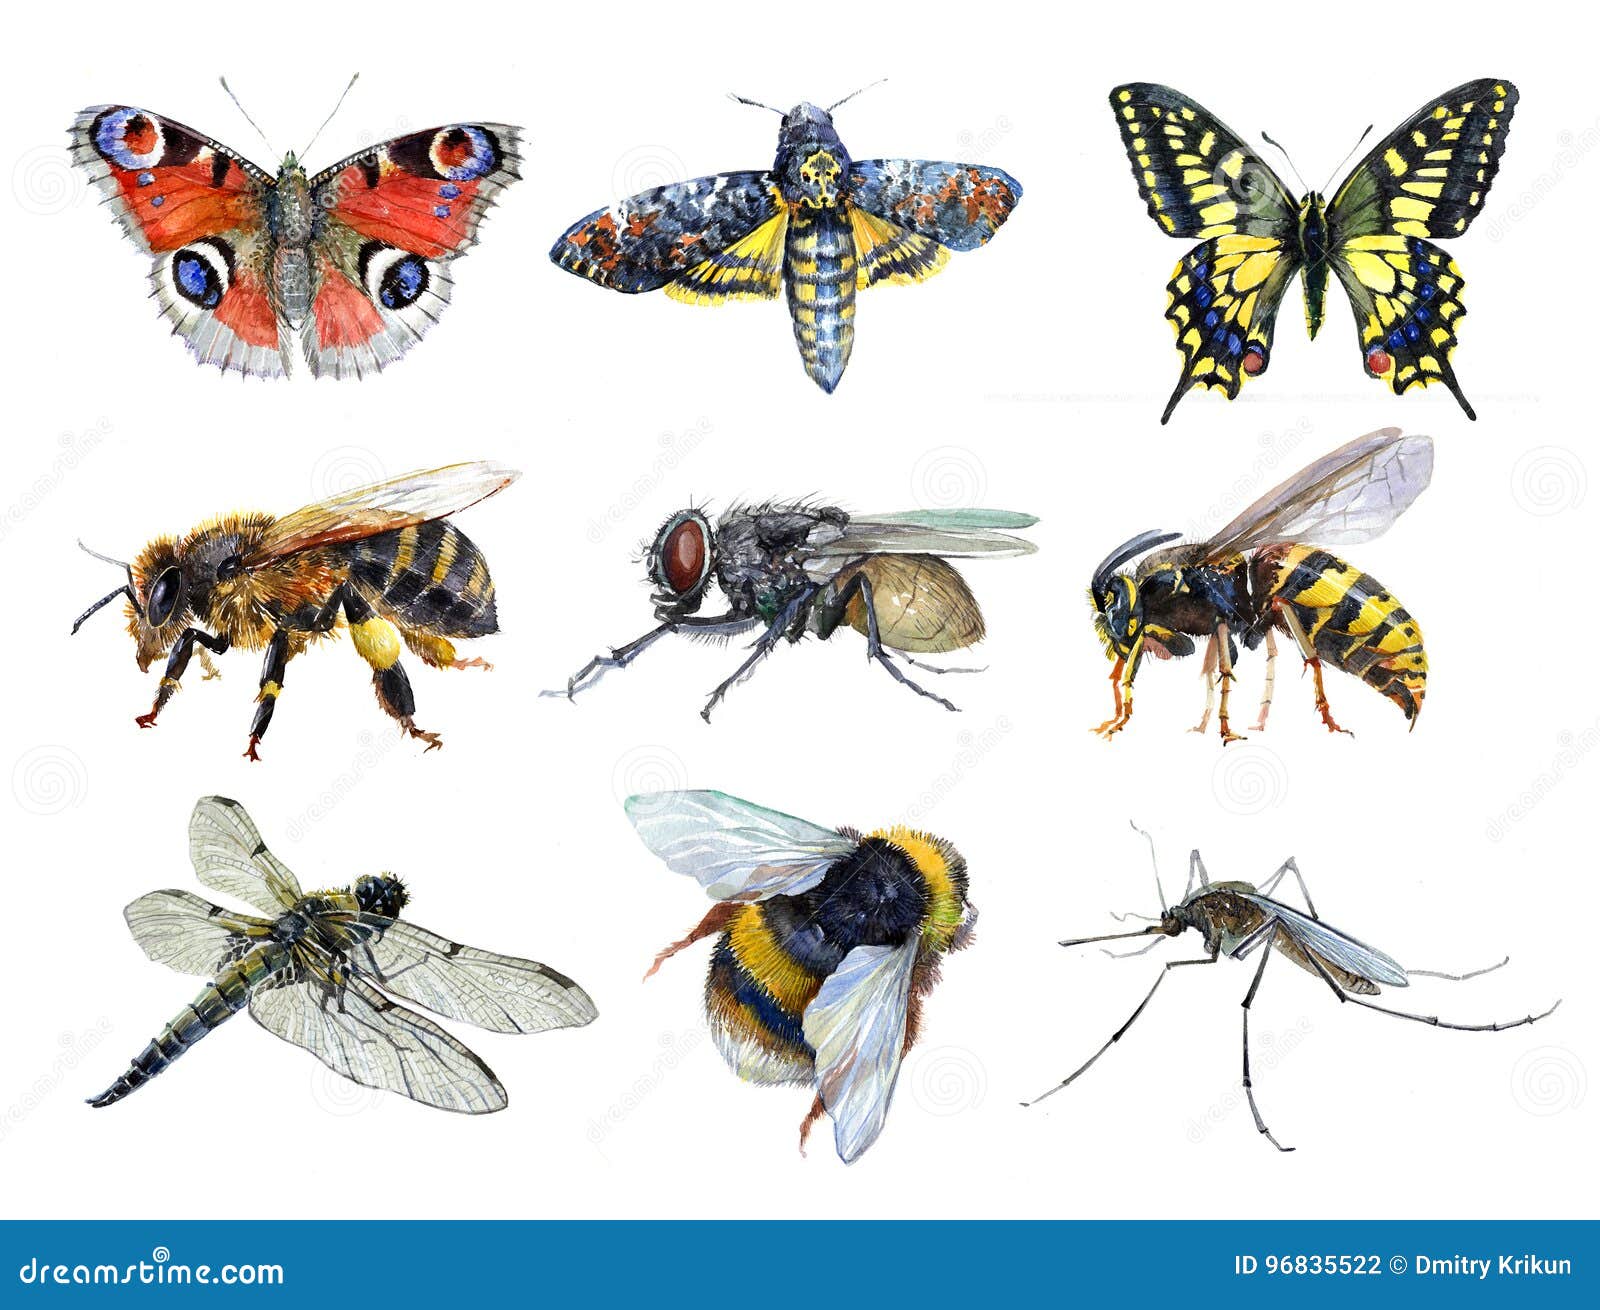 watercolor set of insect animals wasp, moth, mosquito, machaon, fly, dragonfly, bumblebee, bee, butterfly 